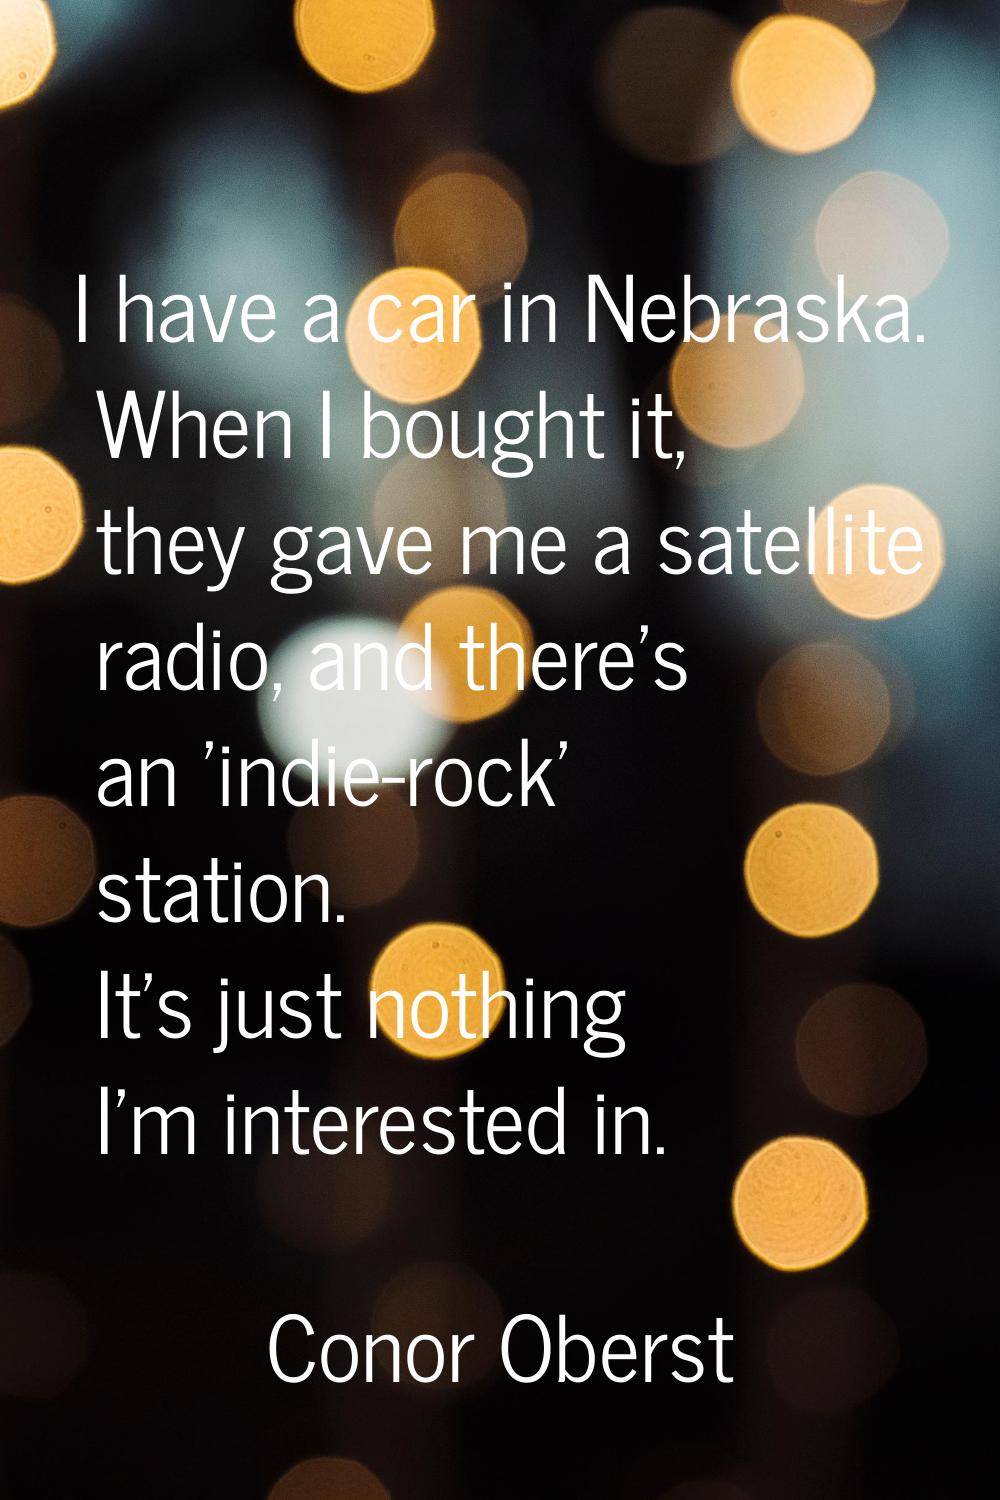 I have a car in Nebraska. When I bought it, they gave me a satellite radio, and there's an 'indie-r